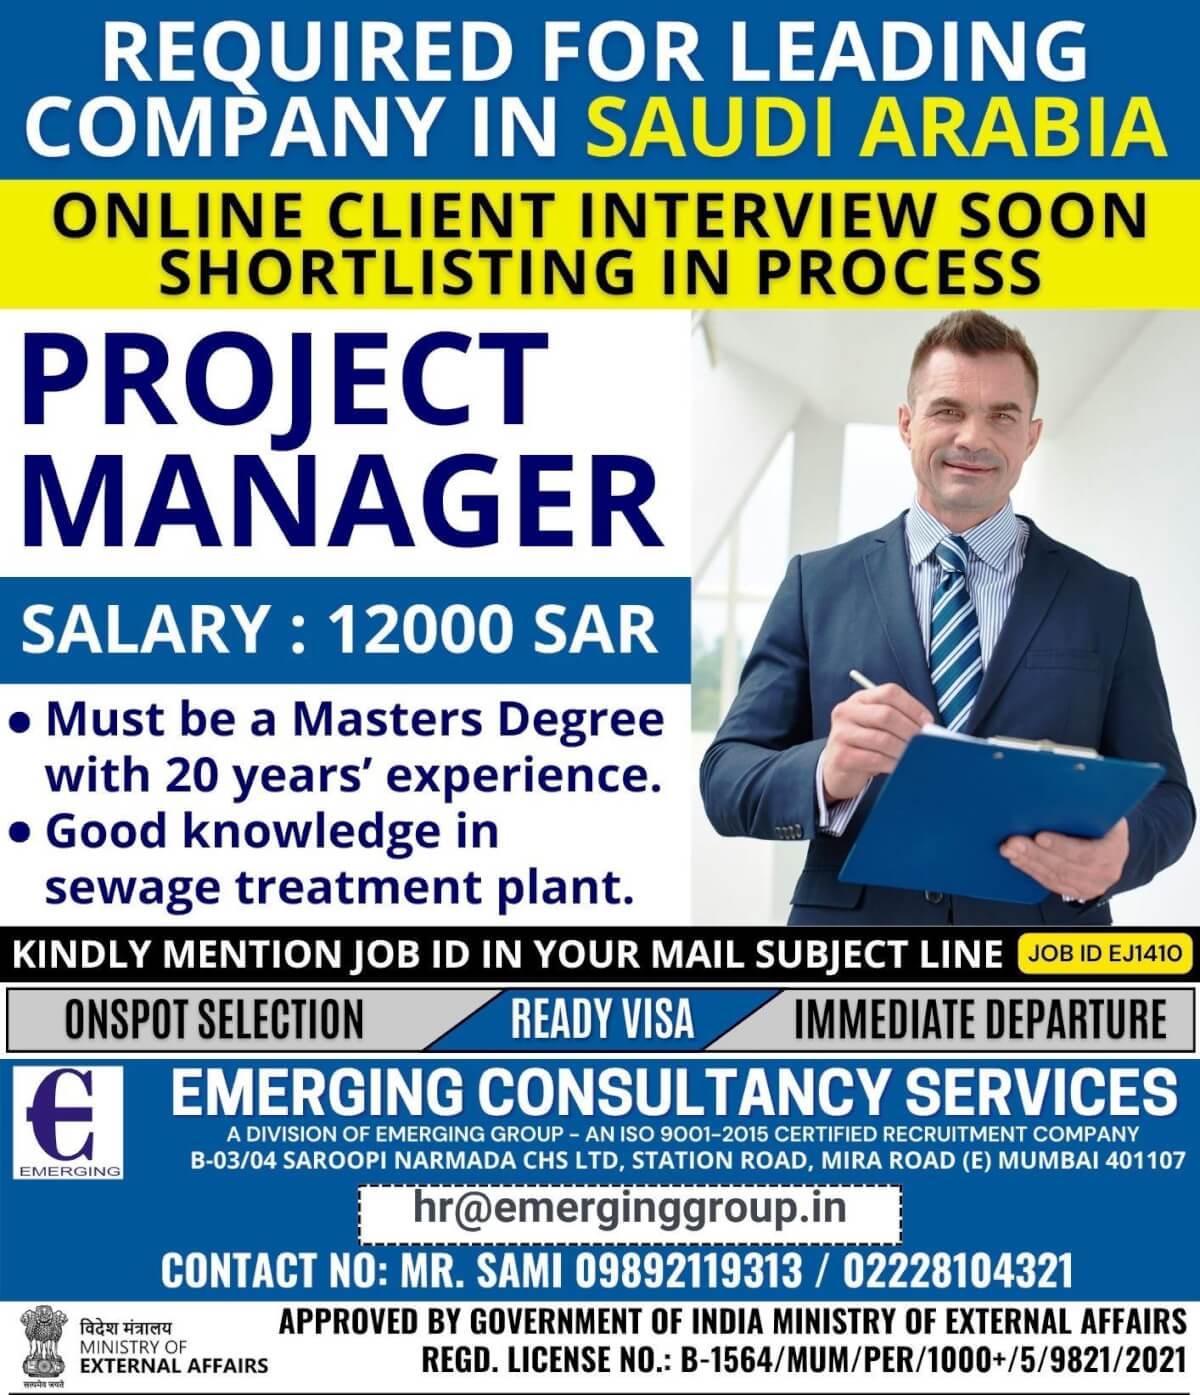 URGENTLY REQUIRED FOR LEADING COMPANY IN SAUDI ARABIA - SHORTLISTING IN PROCESS.